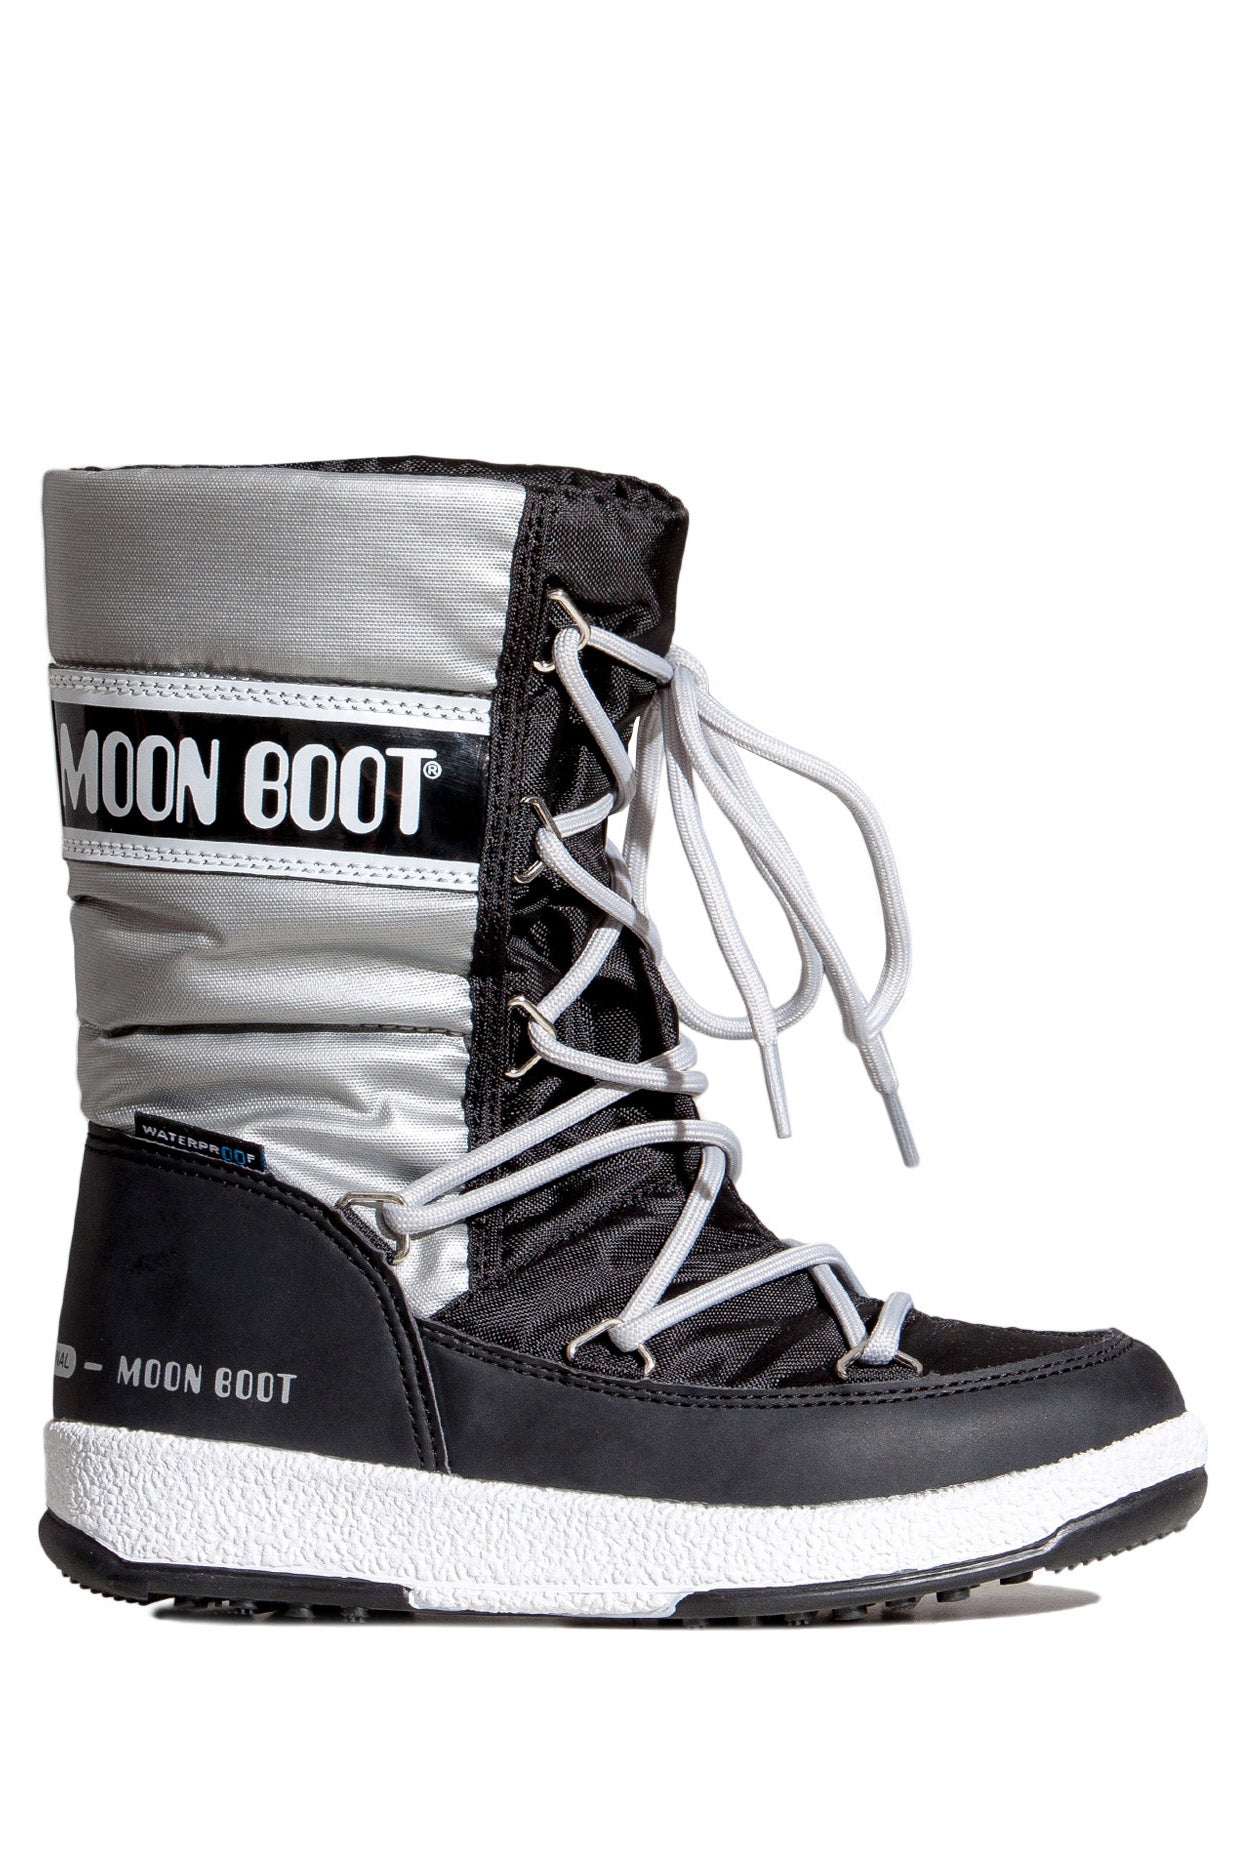 ŚNIEGOWCE MOON BOOT JR G QUILTED WP BLACK SILVER